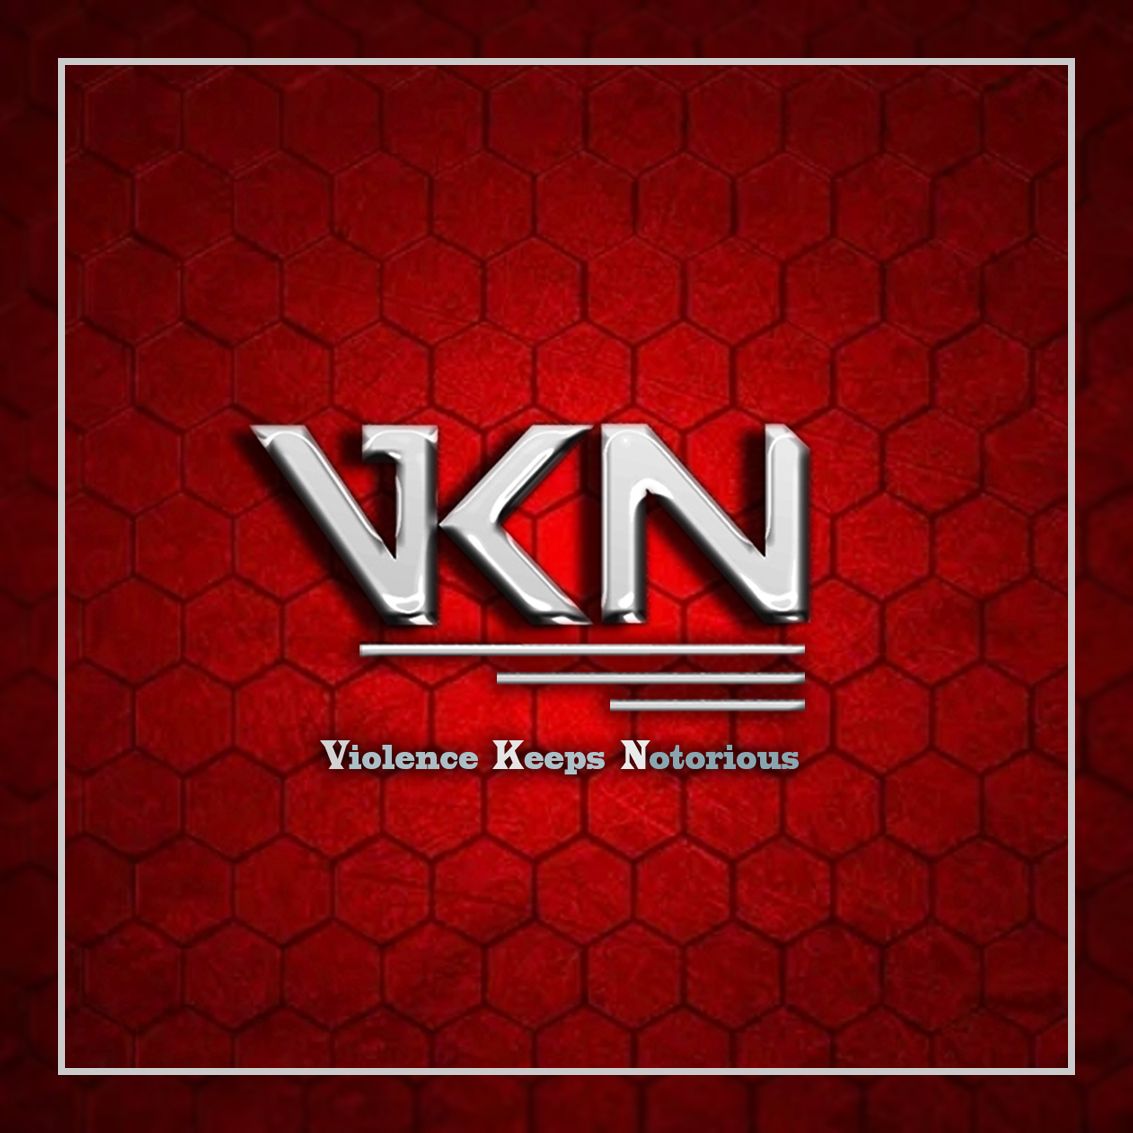 Violence Keeps Notorious